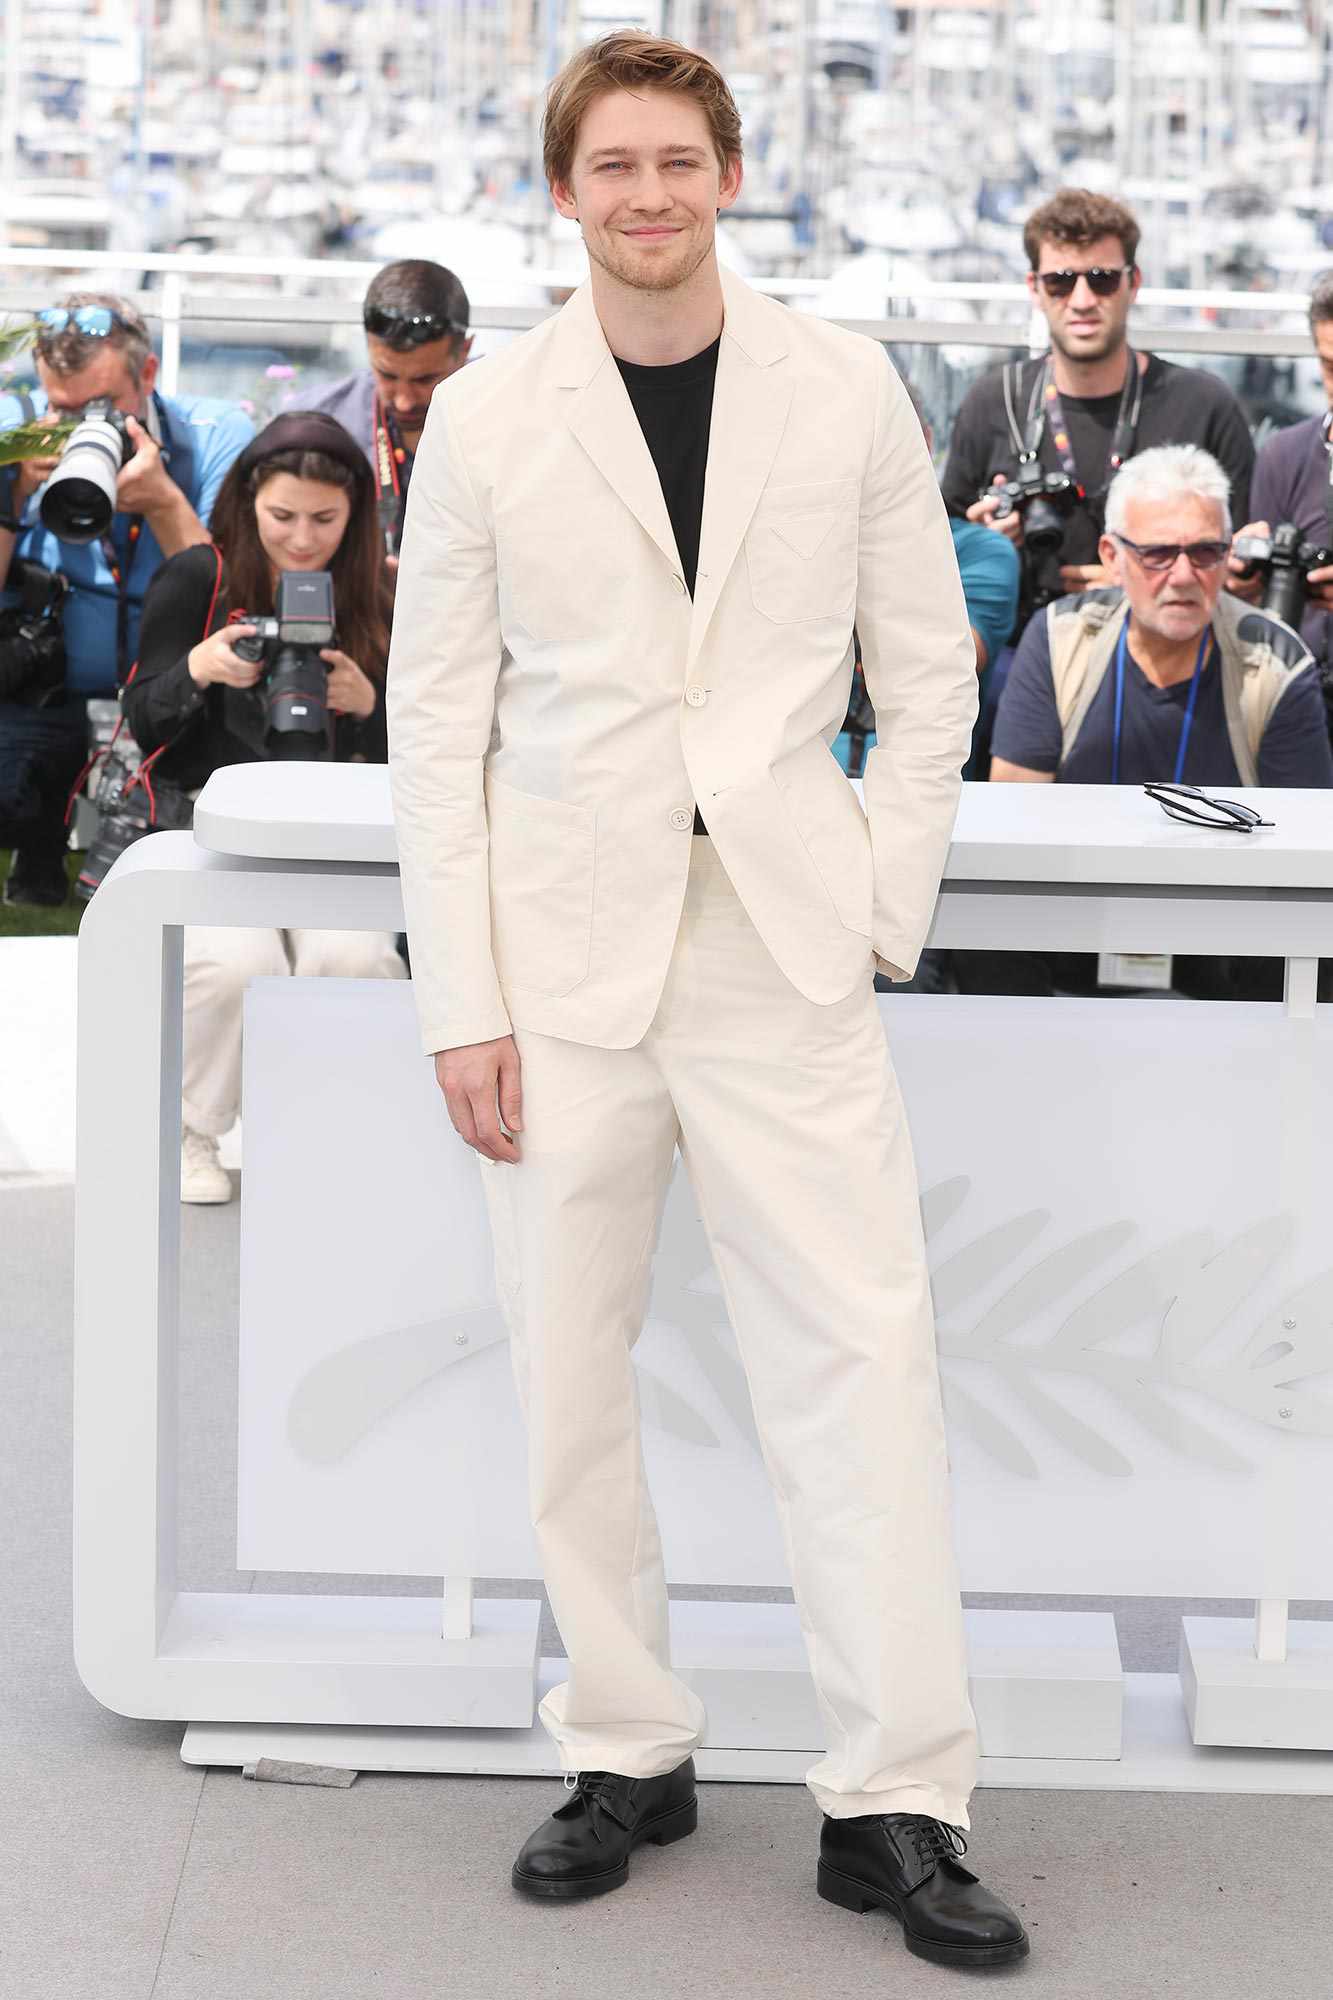 Joe Alwyn attends the photocall for "Stars At Noon" during the 75th annual Cannes film festival at Palais des Festivals on May 26, 2022 in Cannes, France.